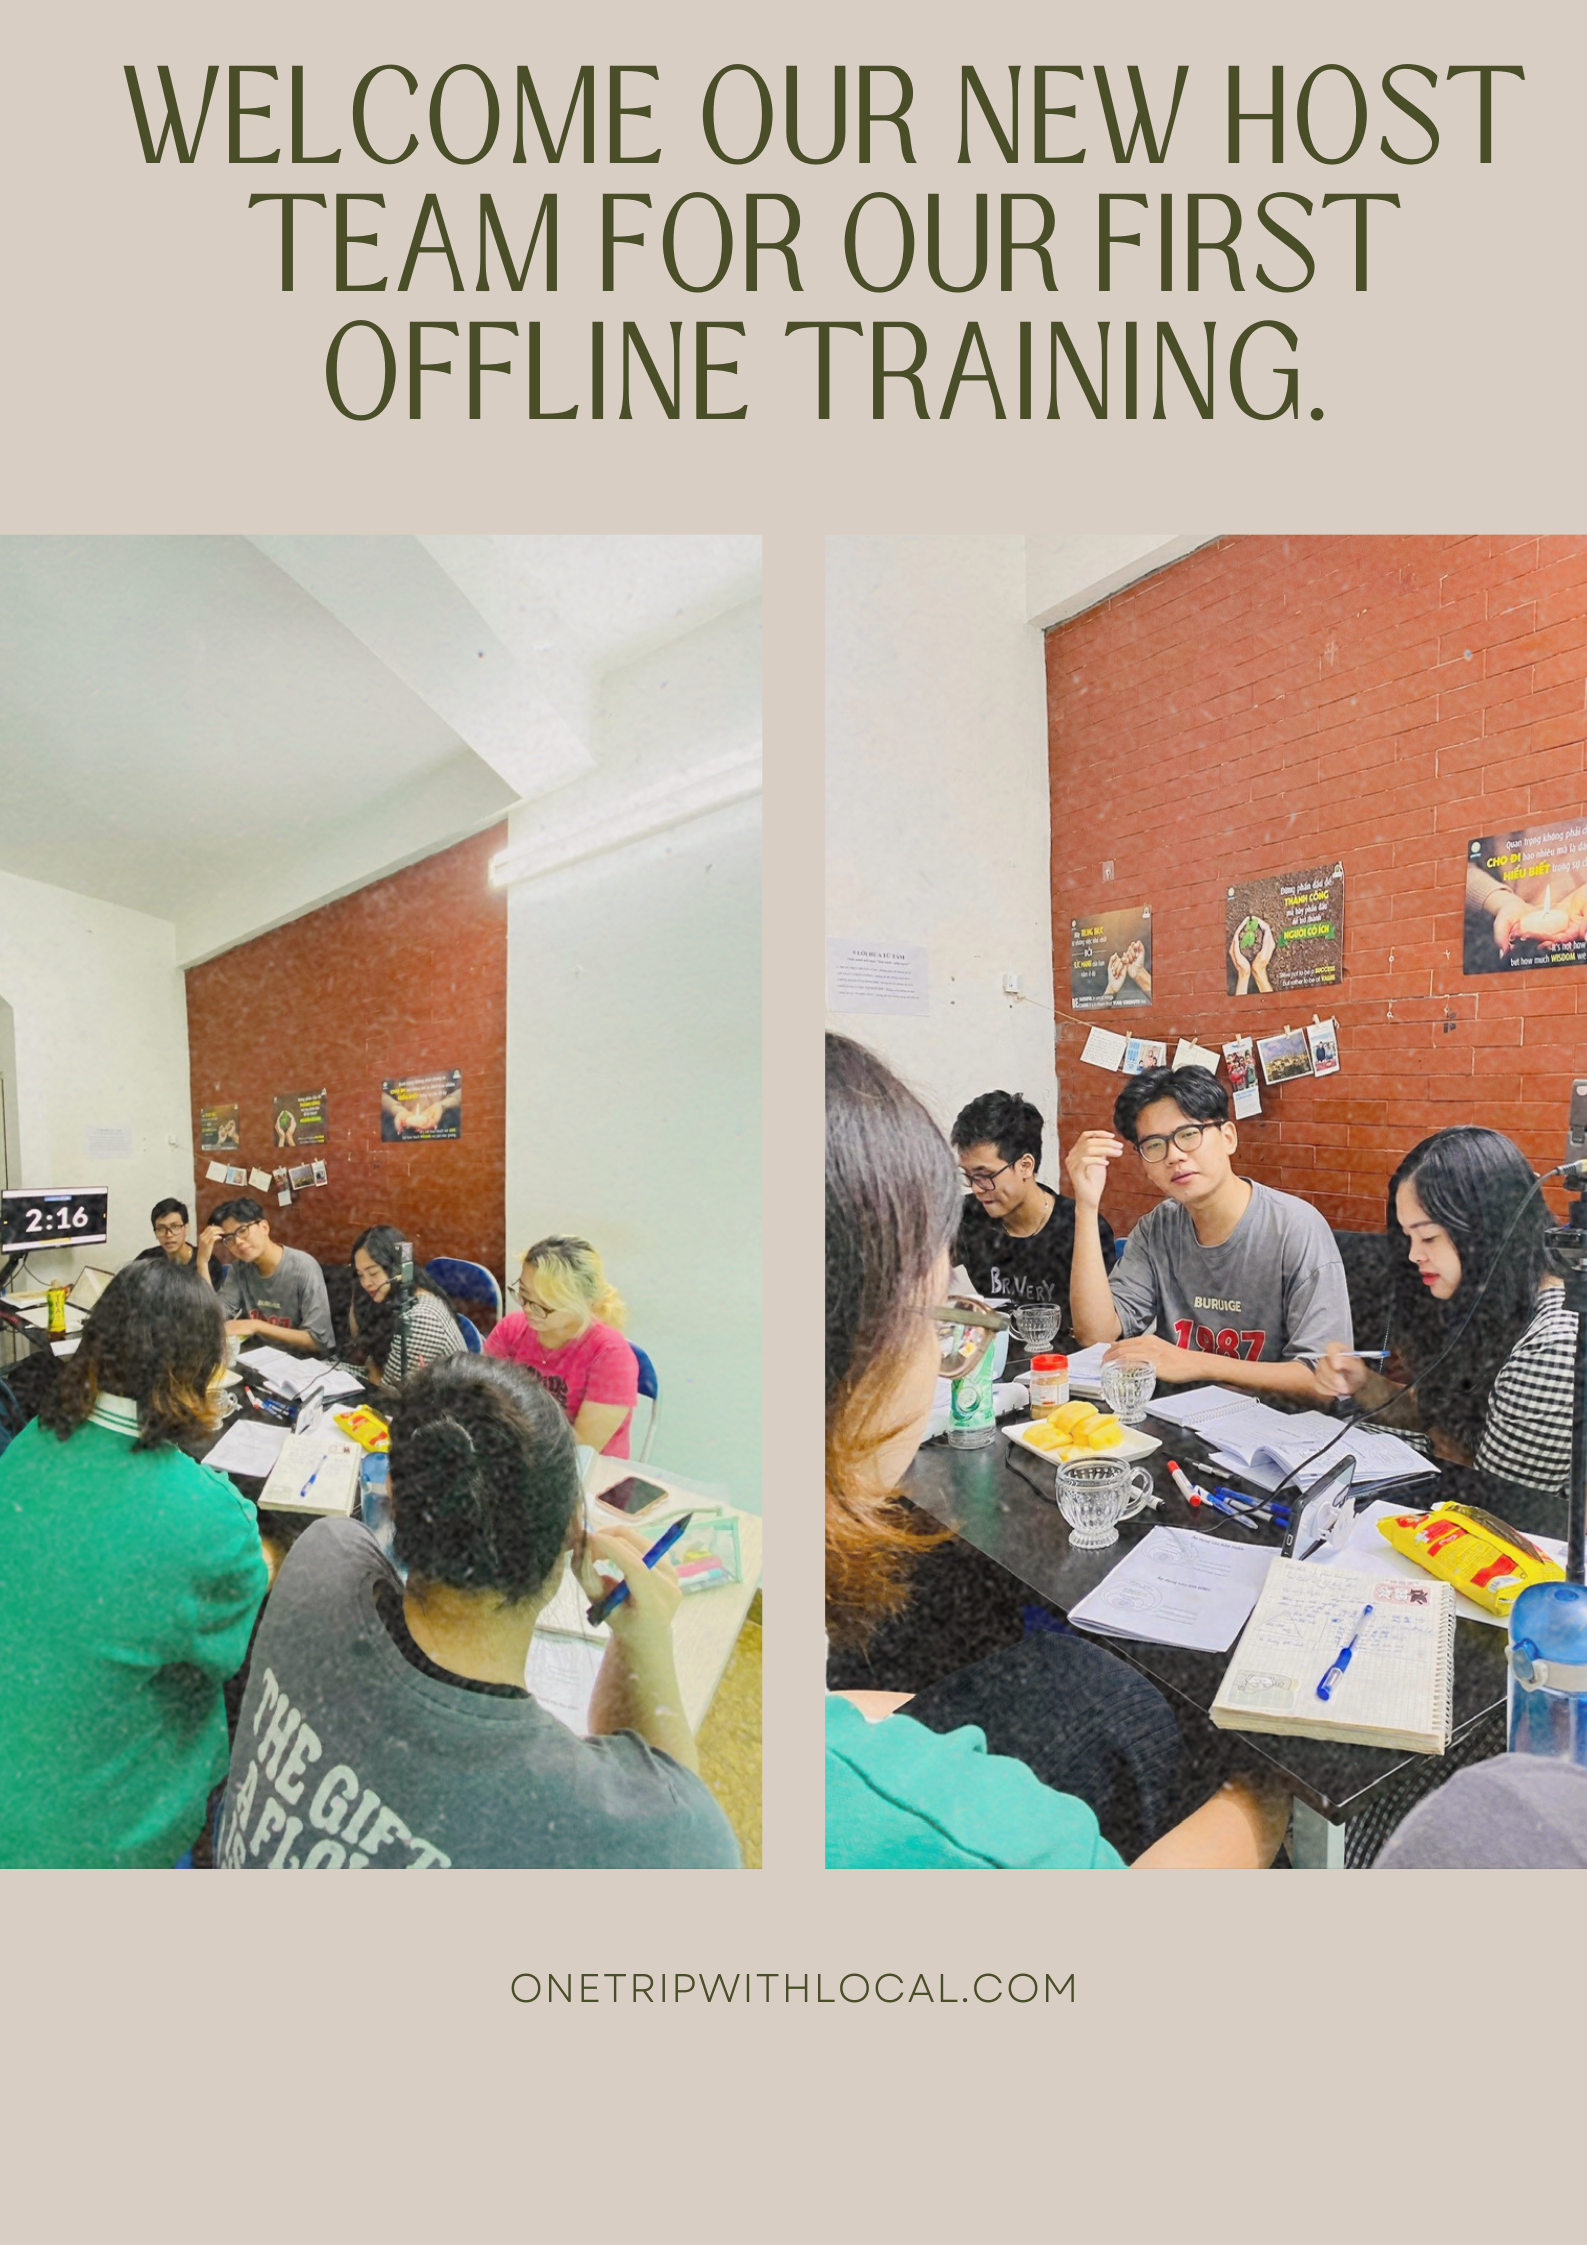 Welcome our new host team for our first offline training Welcome our new host team for our first offline training.